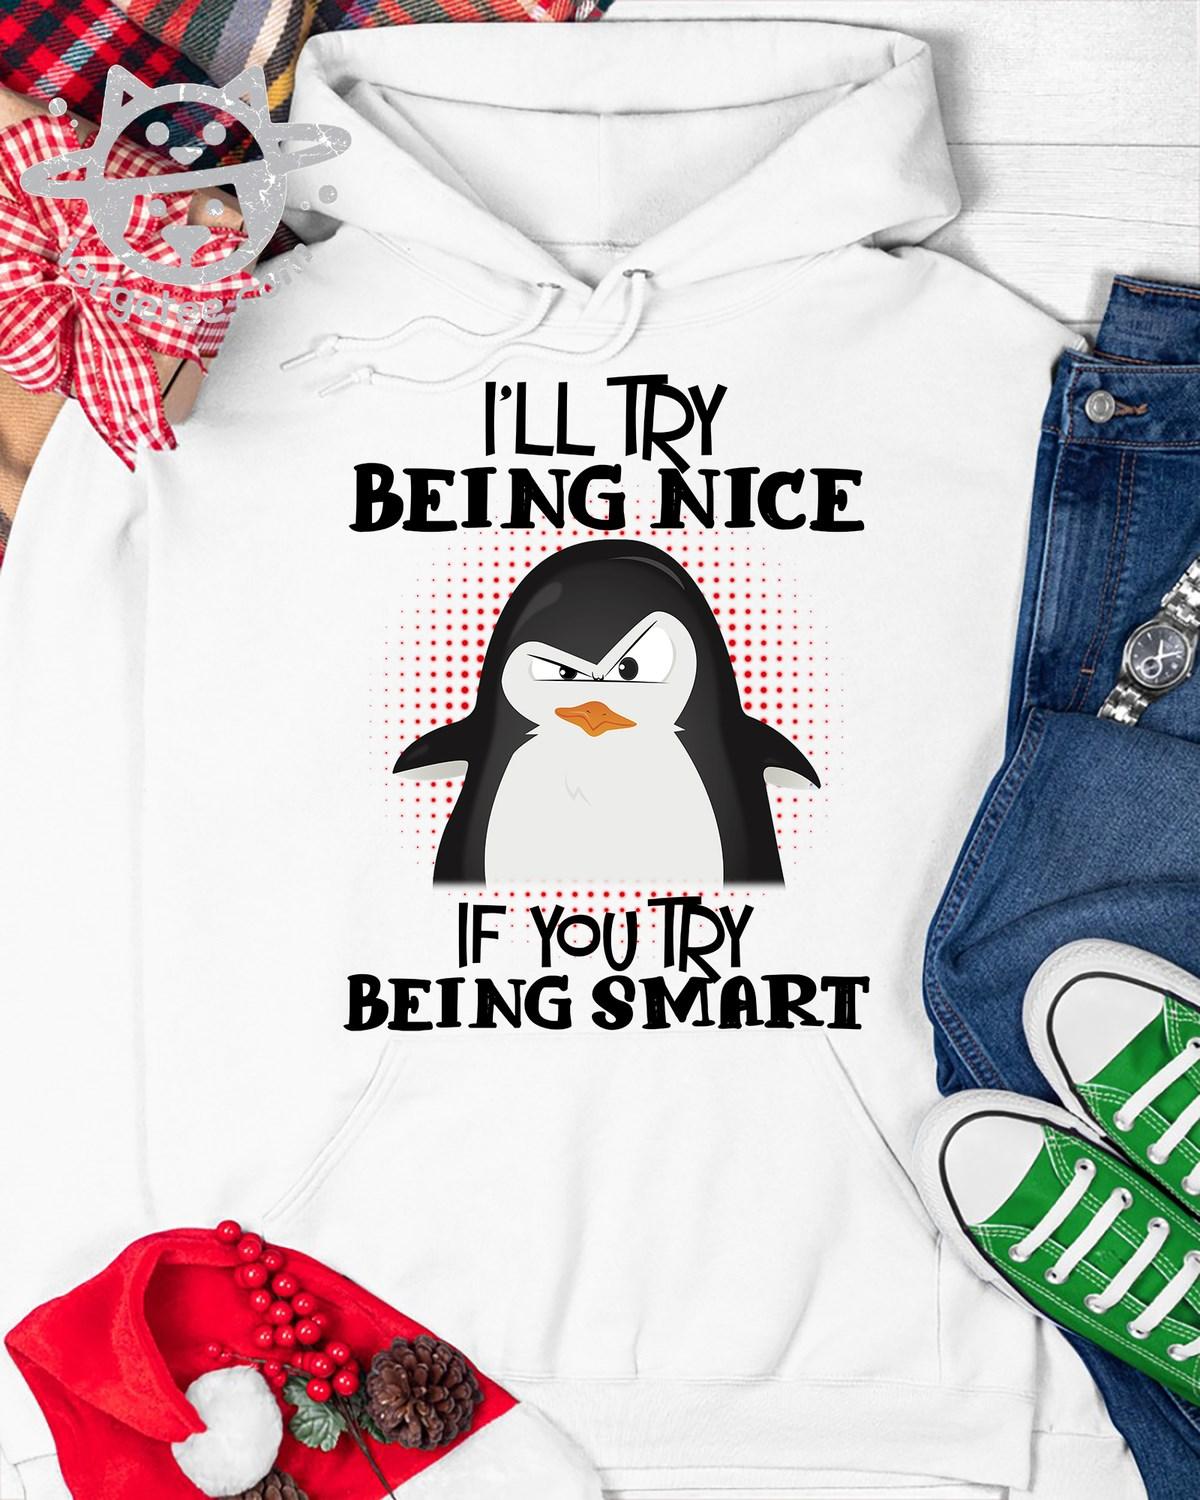 I'll try being nice if you try being smart - Grumpy gorgeous penguin, hate stupid people